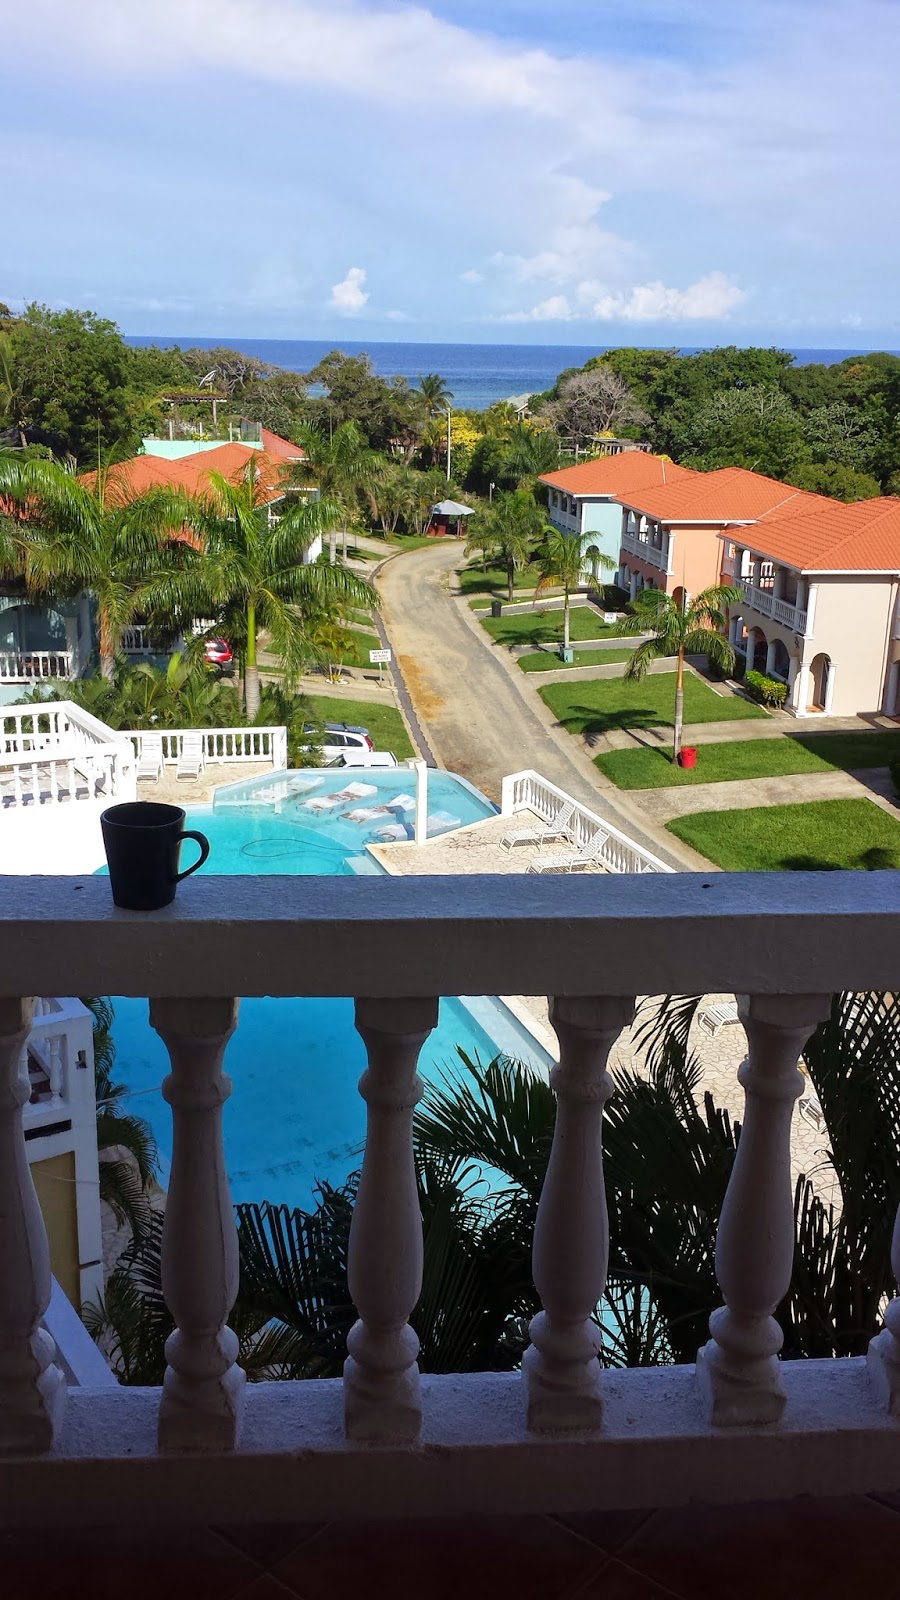 Remaxvipbelize: Our Room View